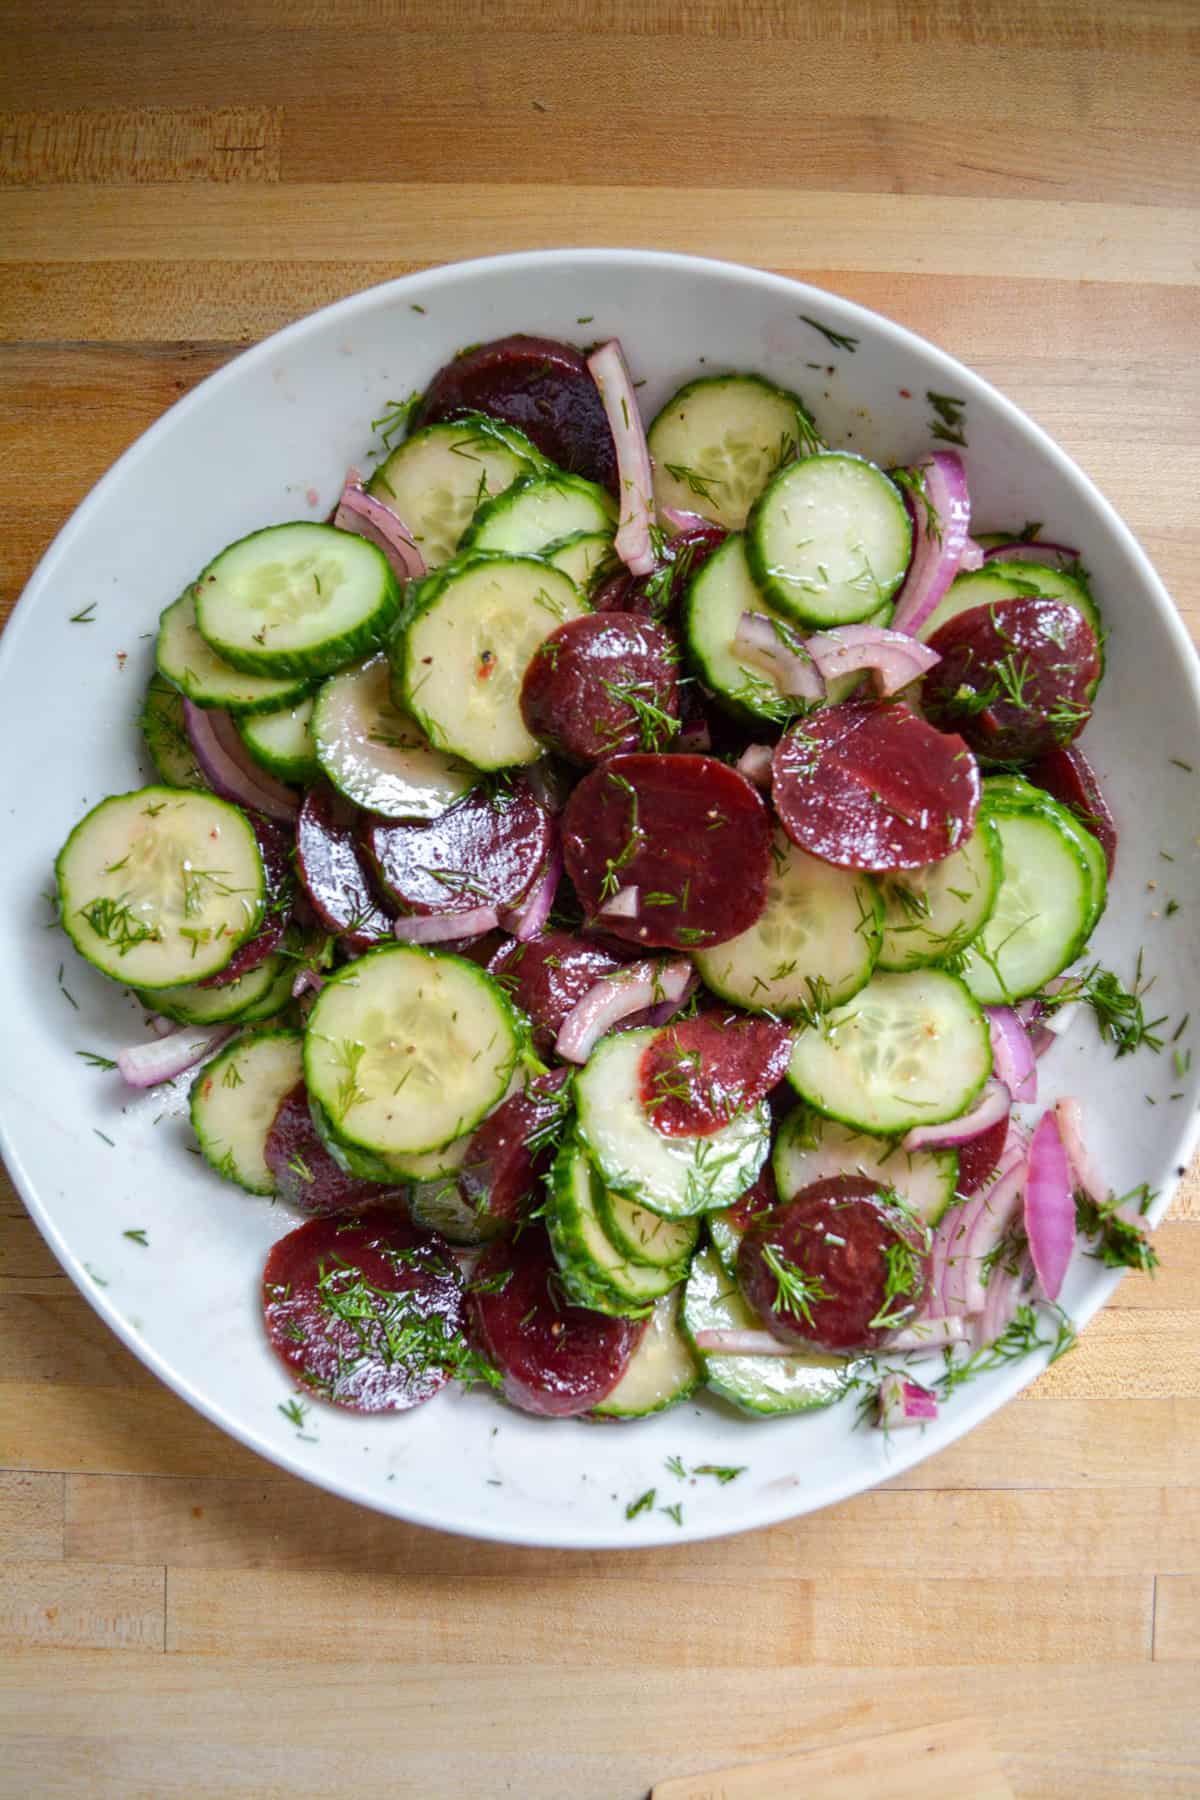 Beet cucumber salad all tossed together in a white bowl.